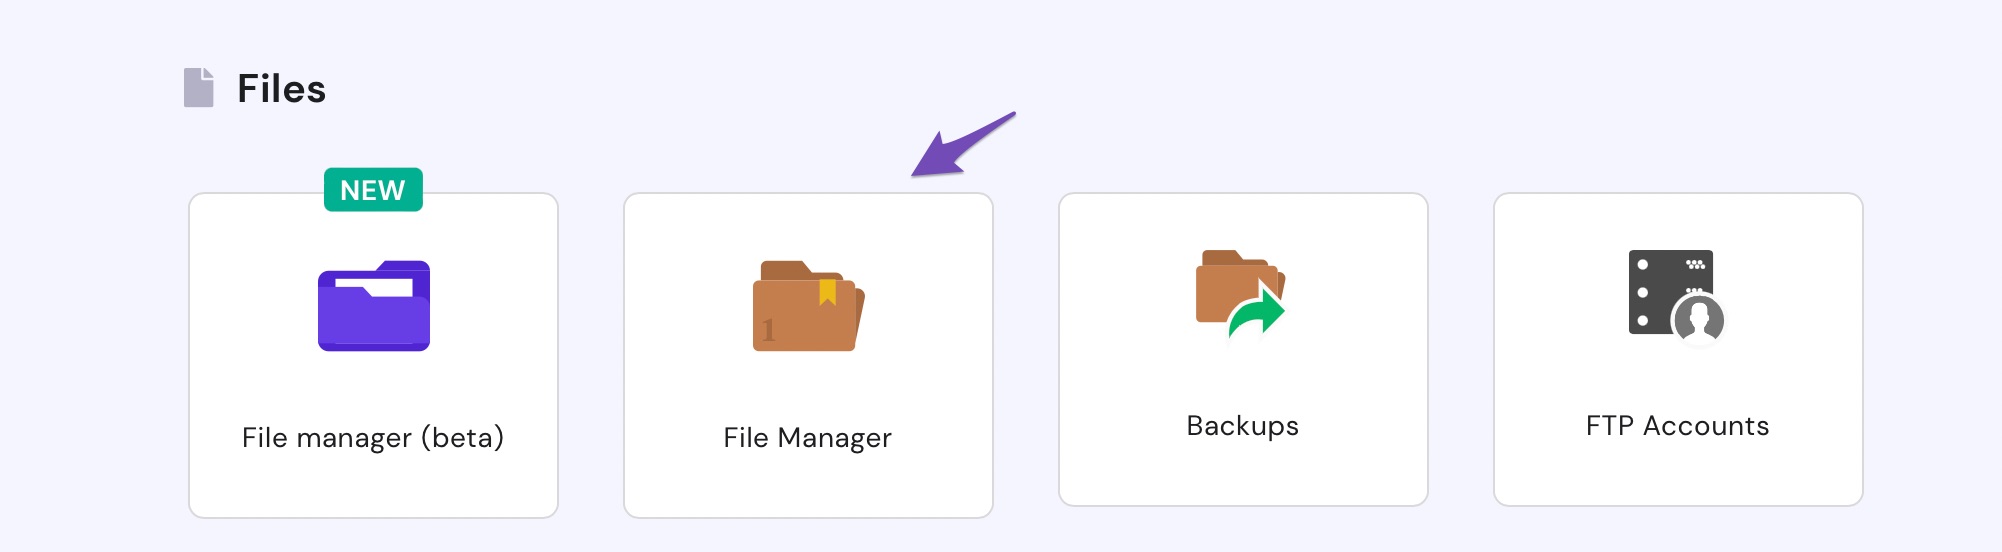 Navigate to the File Manager